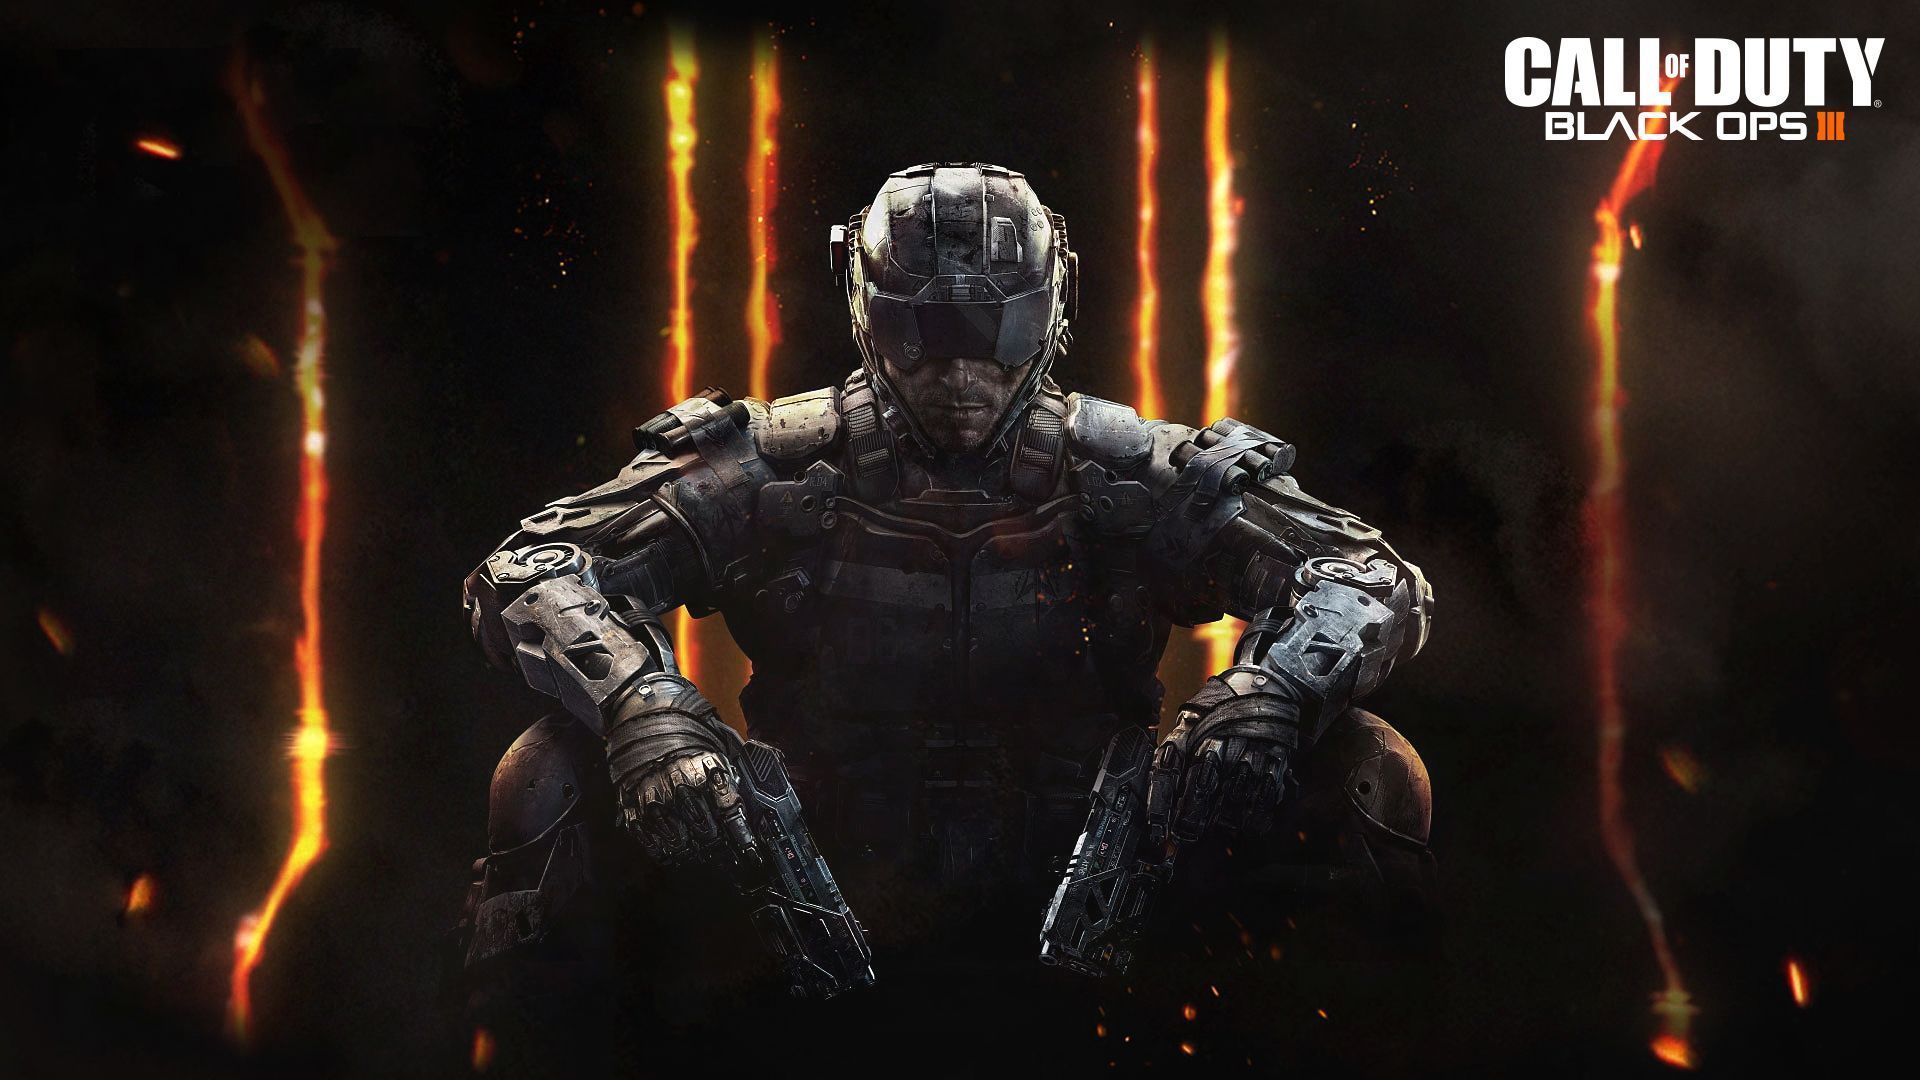 Black Ops 3 Wallpapers (BO3) - Free Download - Unofficial Call of Duty